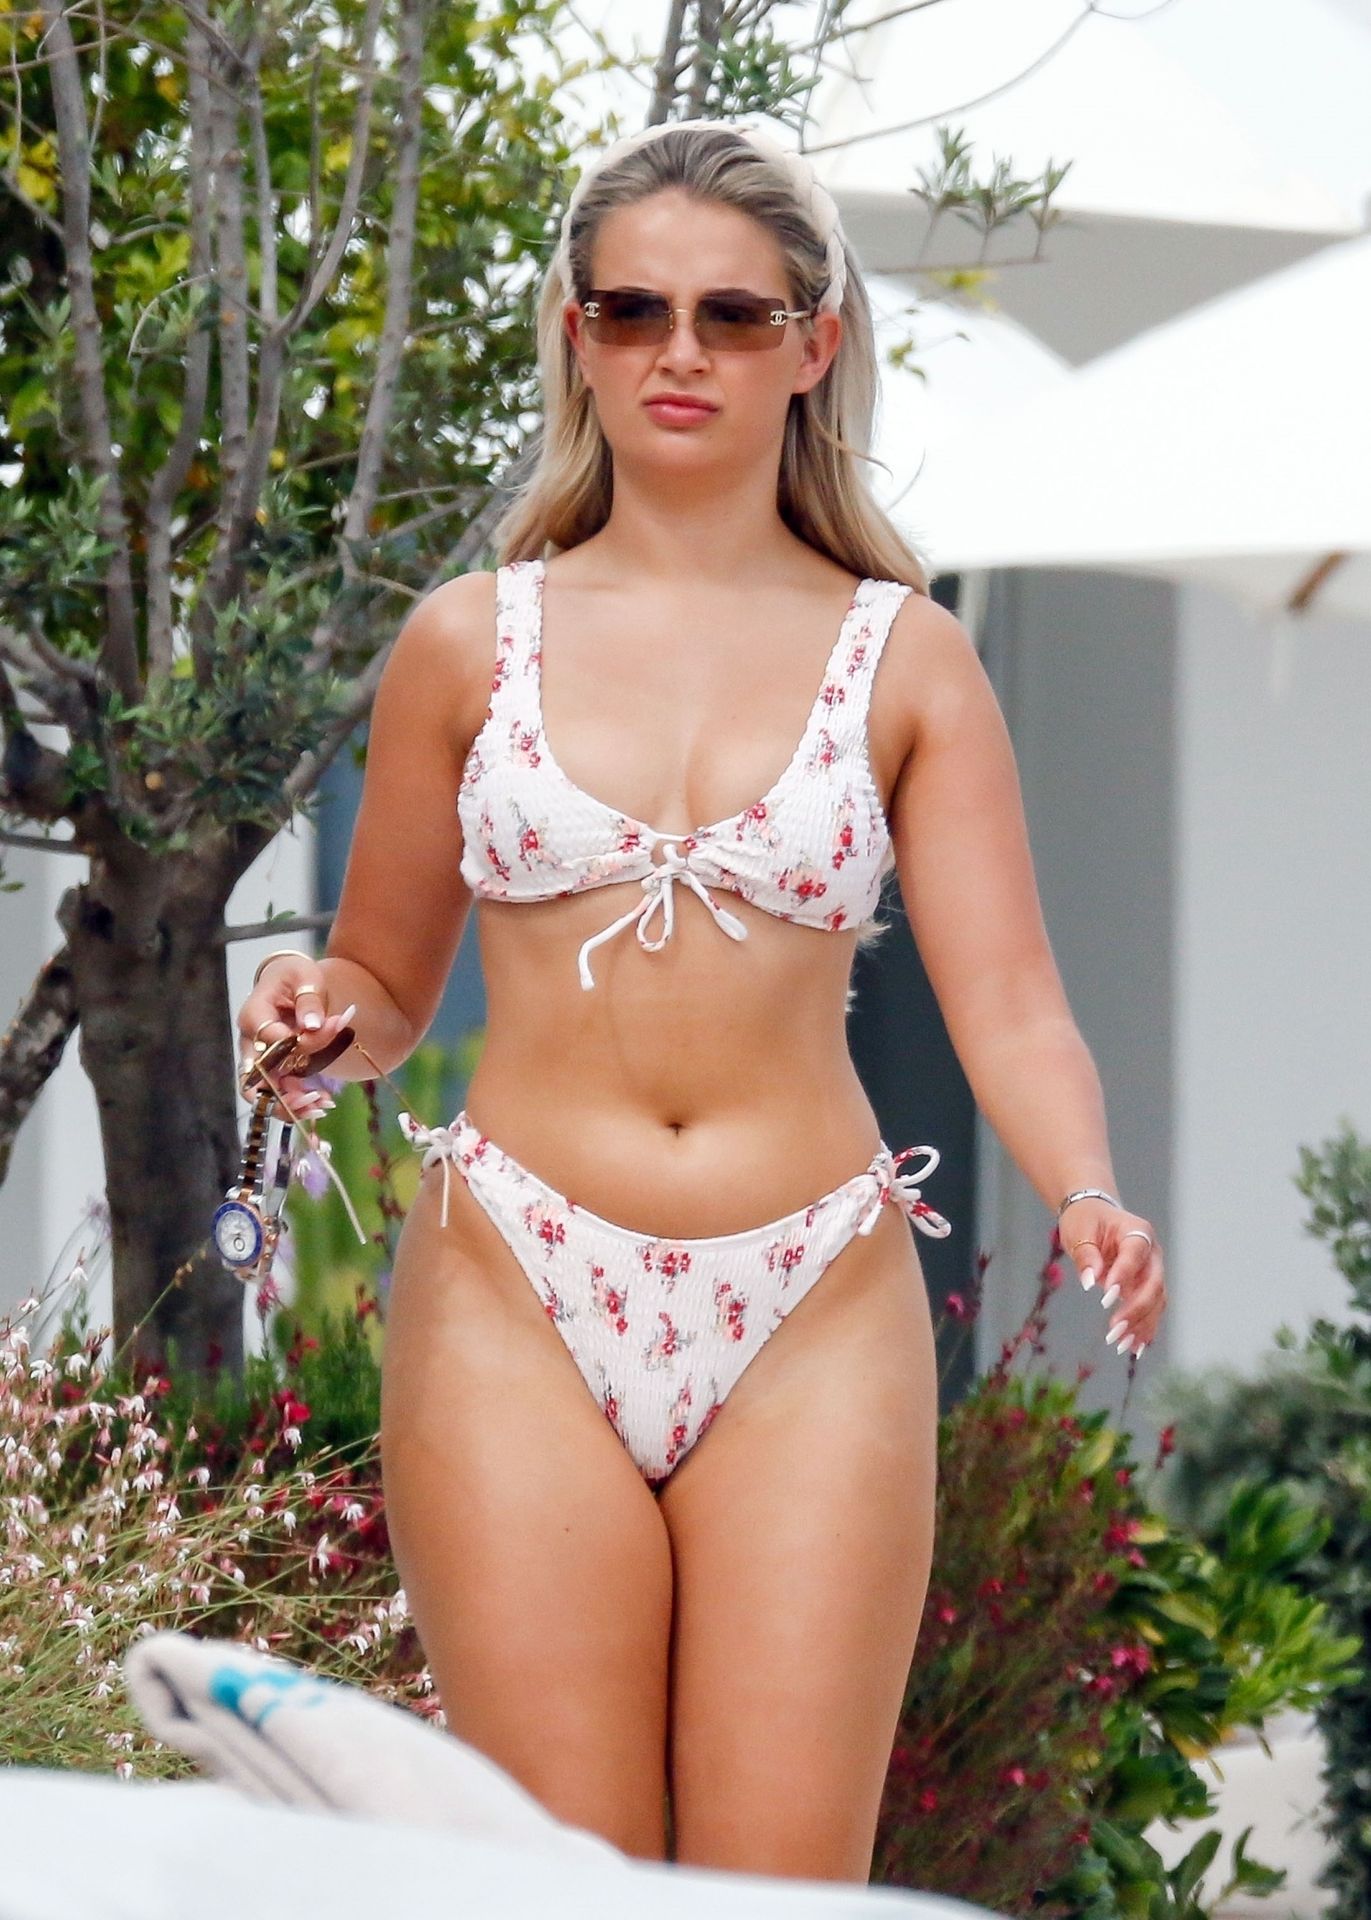 Molly-Mae Hague Shows Off Her Bikini Body While on Holiday in Ibiza (25 Pho...